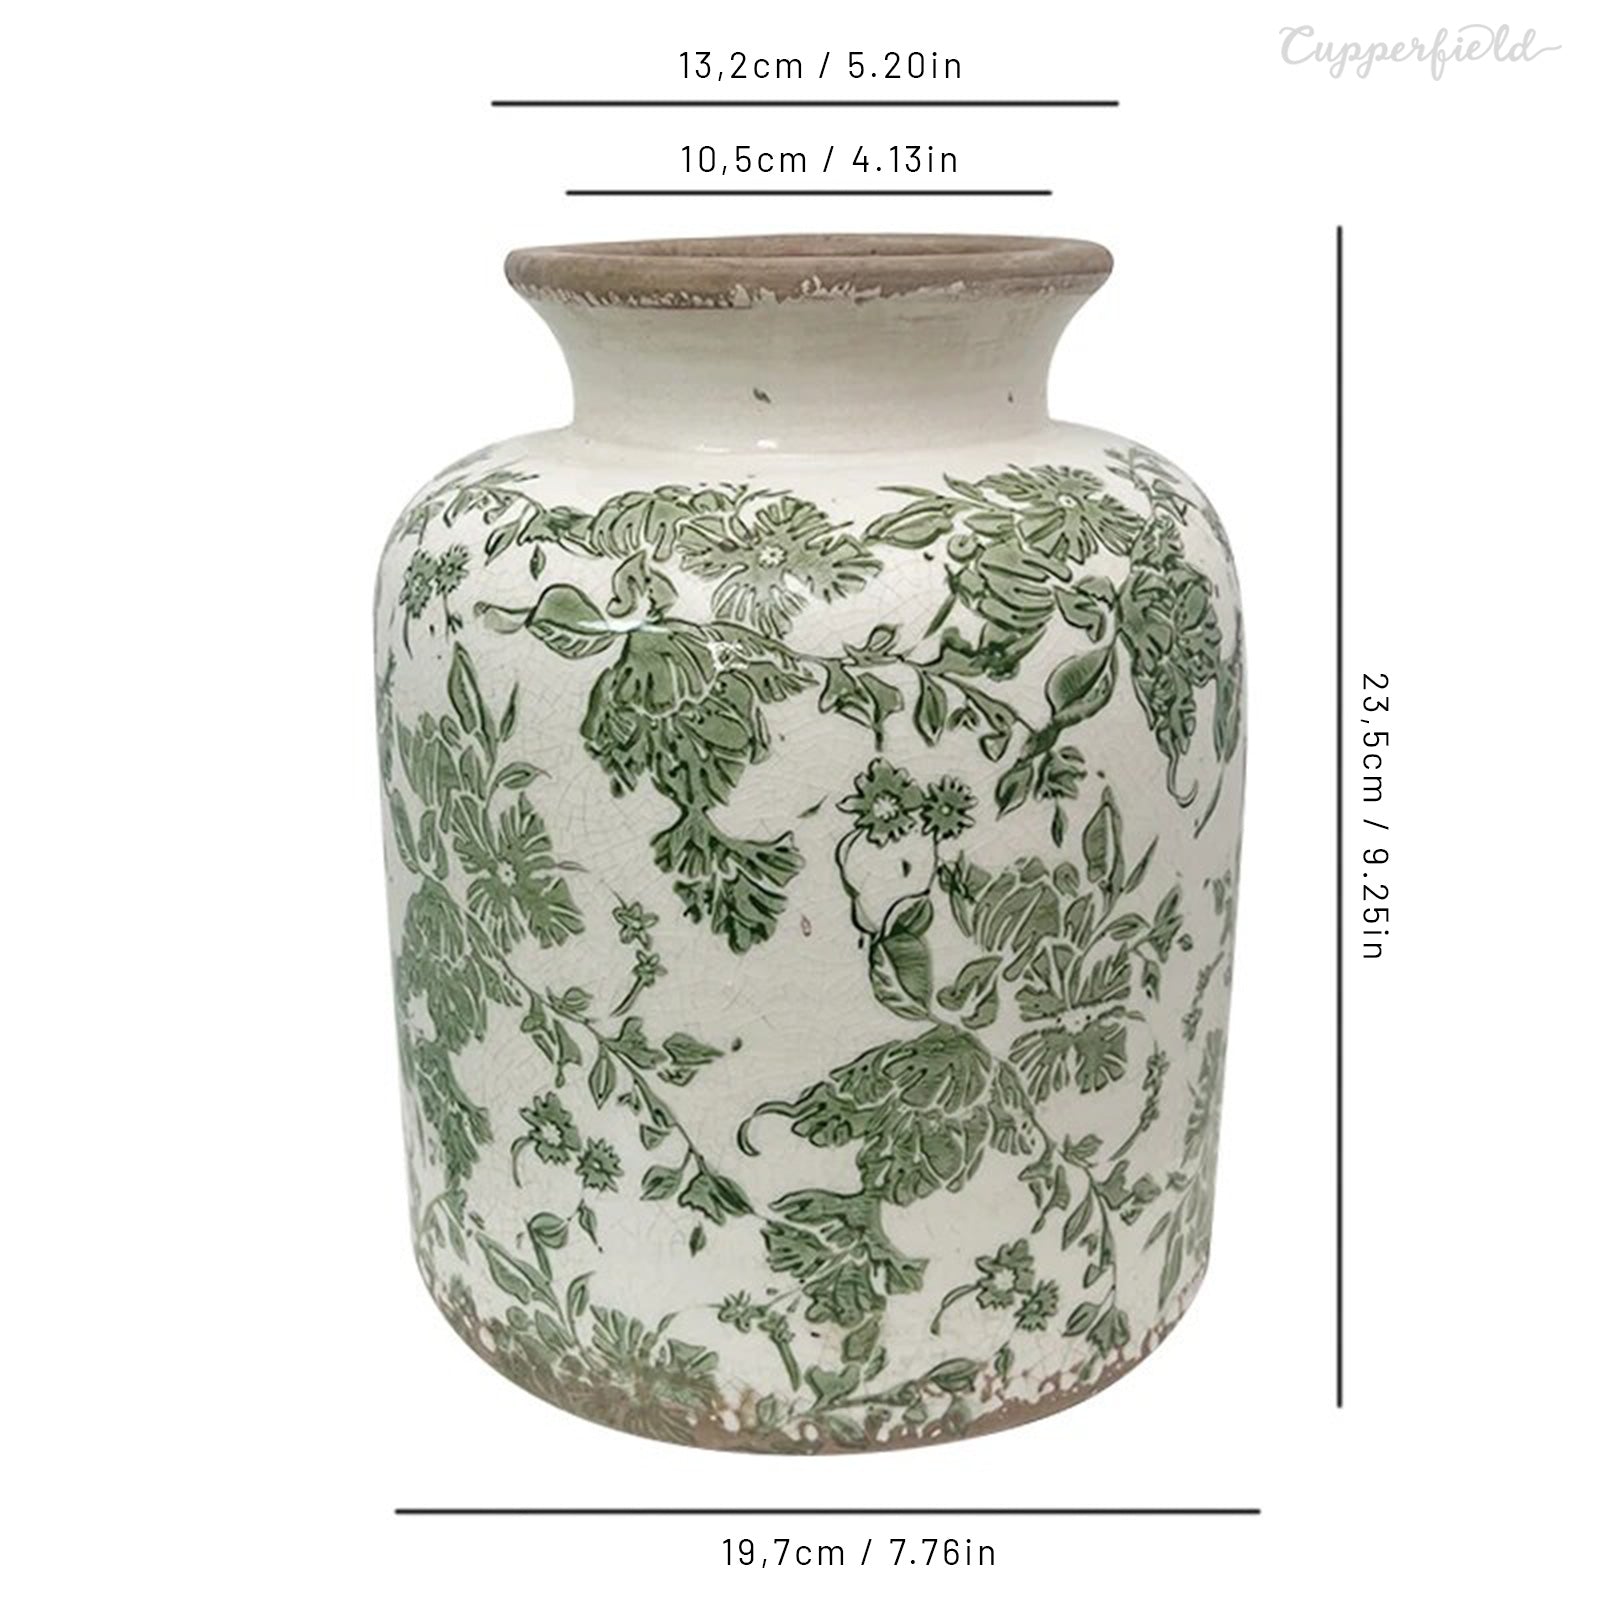 Vintage-inspired Craquelure Vase with Greenery on Off-White Ceramic